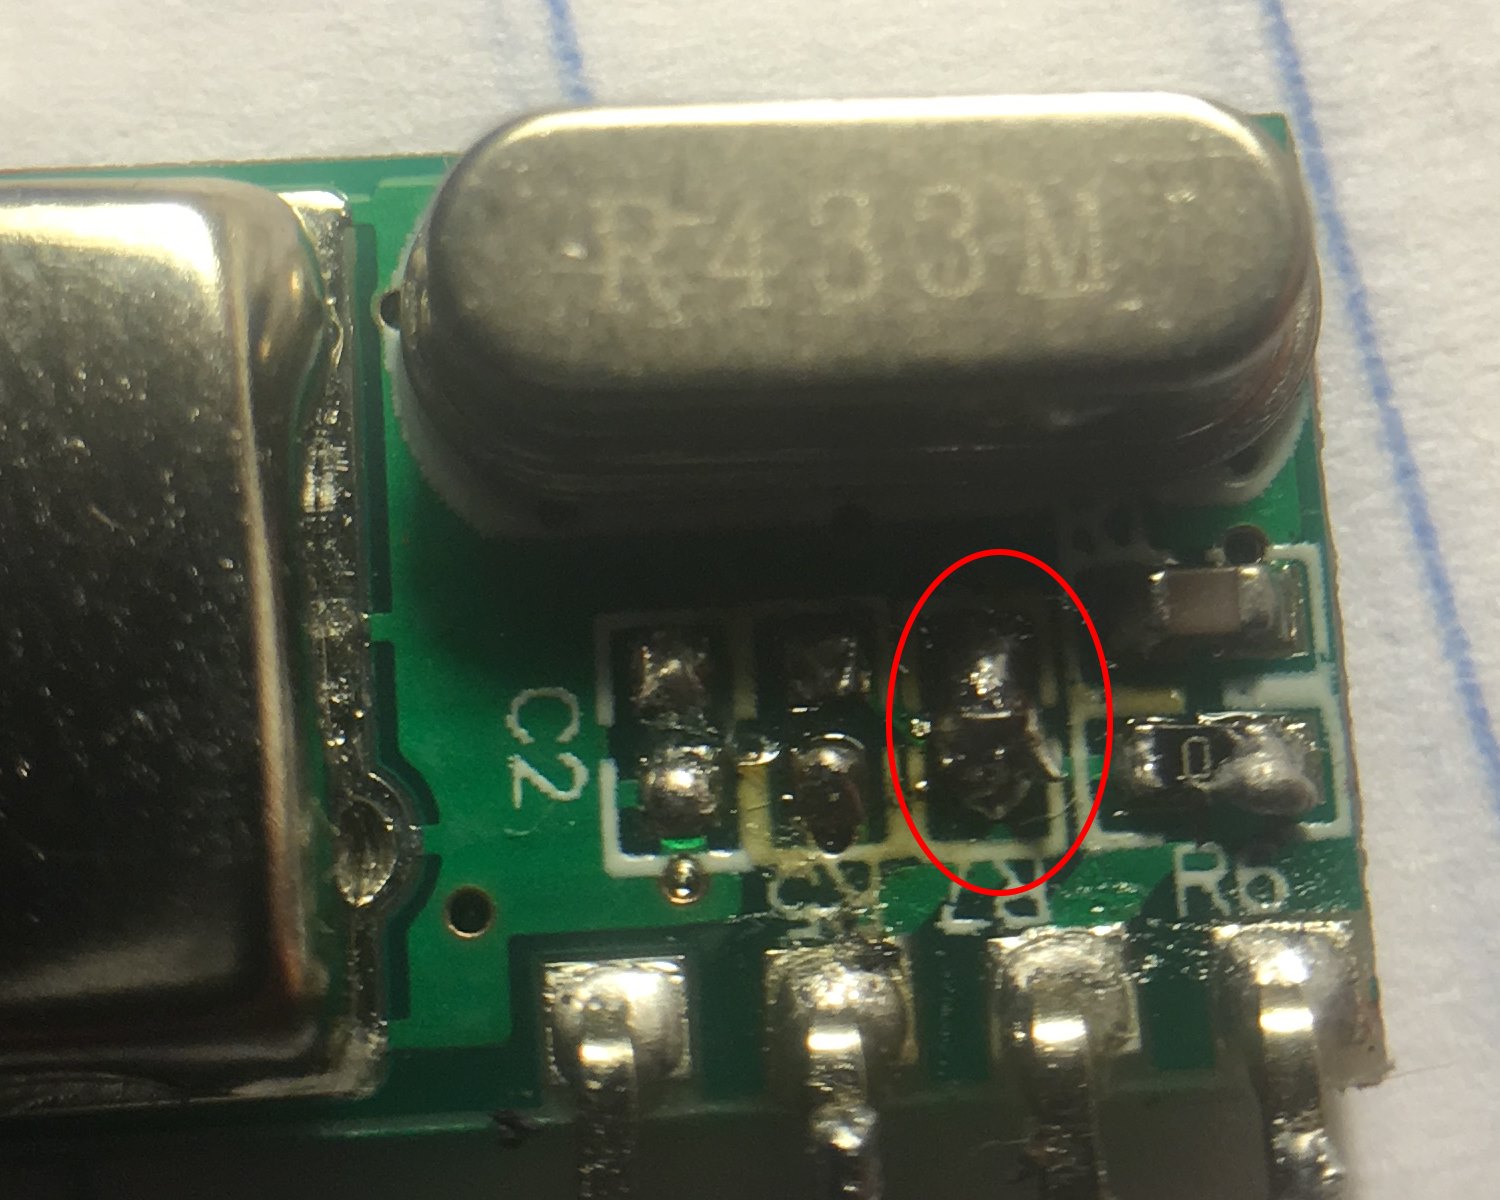 RXB6 soldered to enable RSSI